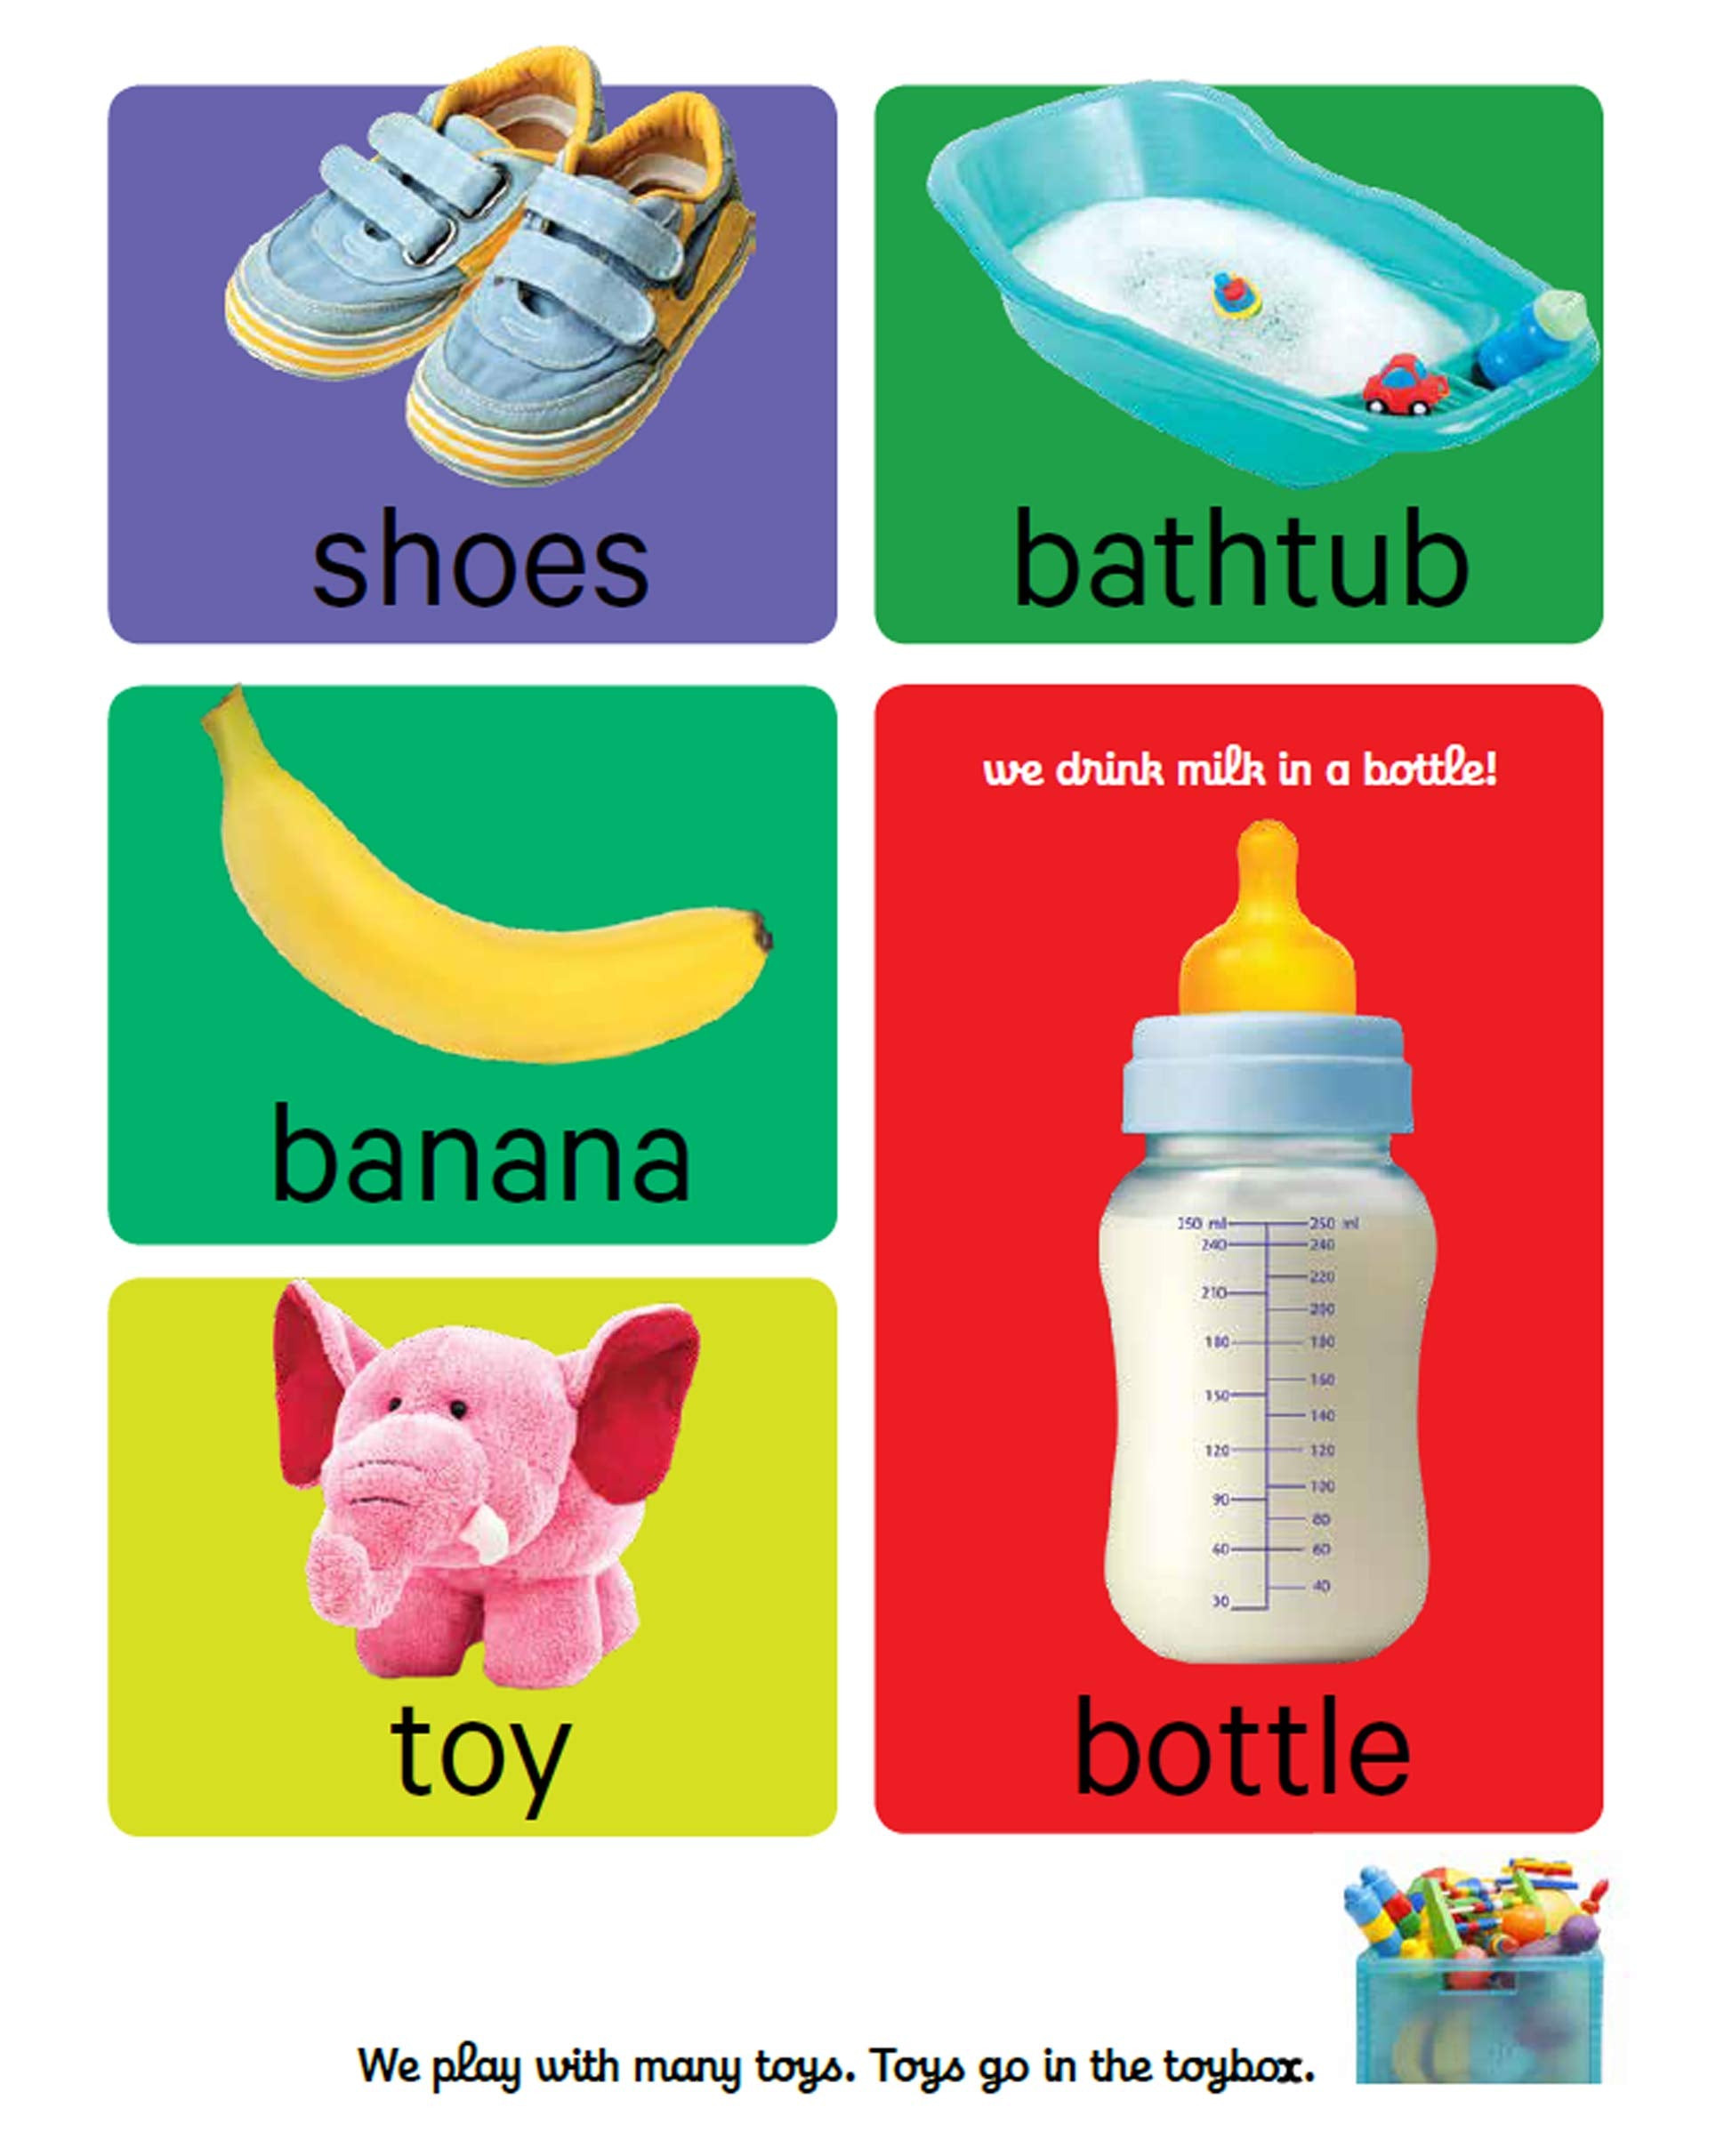 Pegasus Early Learning First Words - Board Book